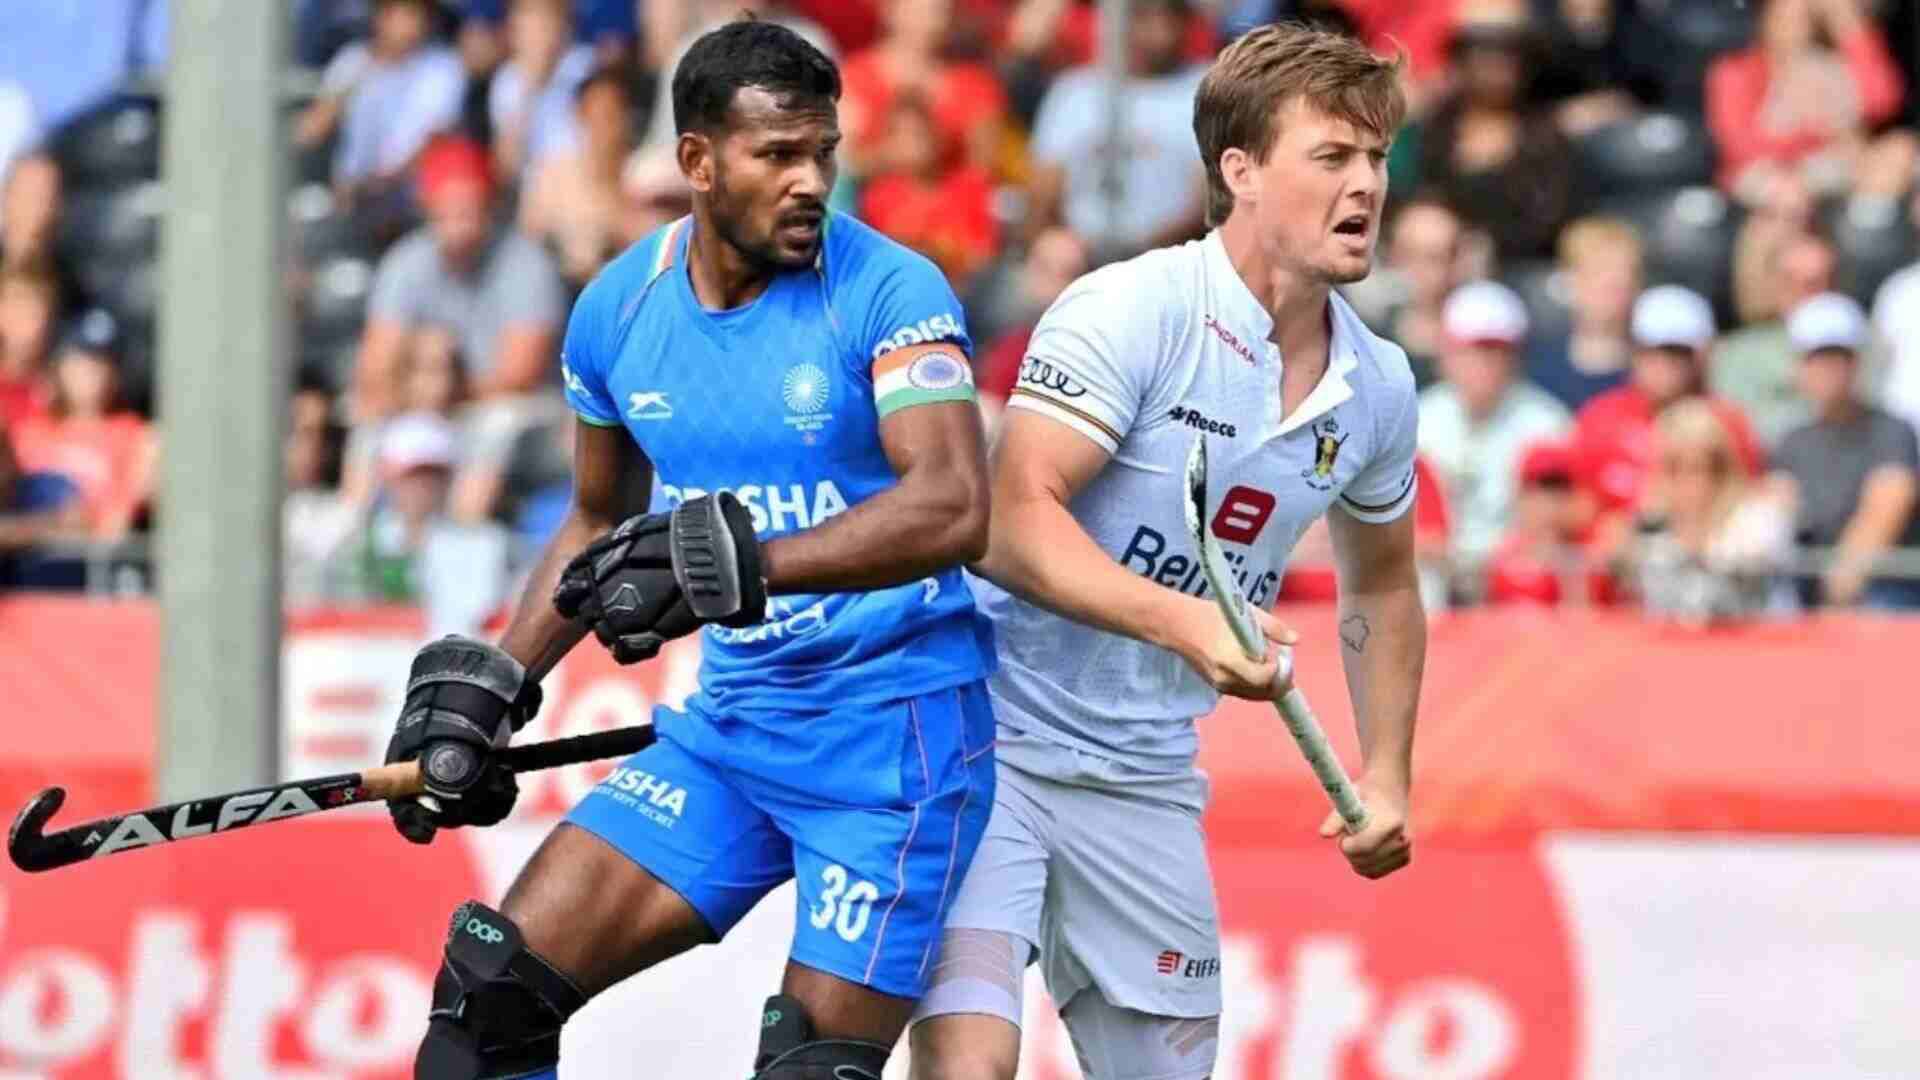 FIH Pro League: Belgium Wins With 4-1 Over India In Men’s Hockey